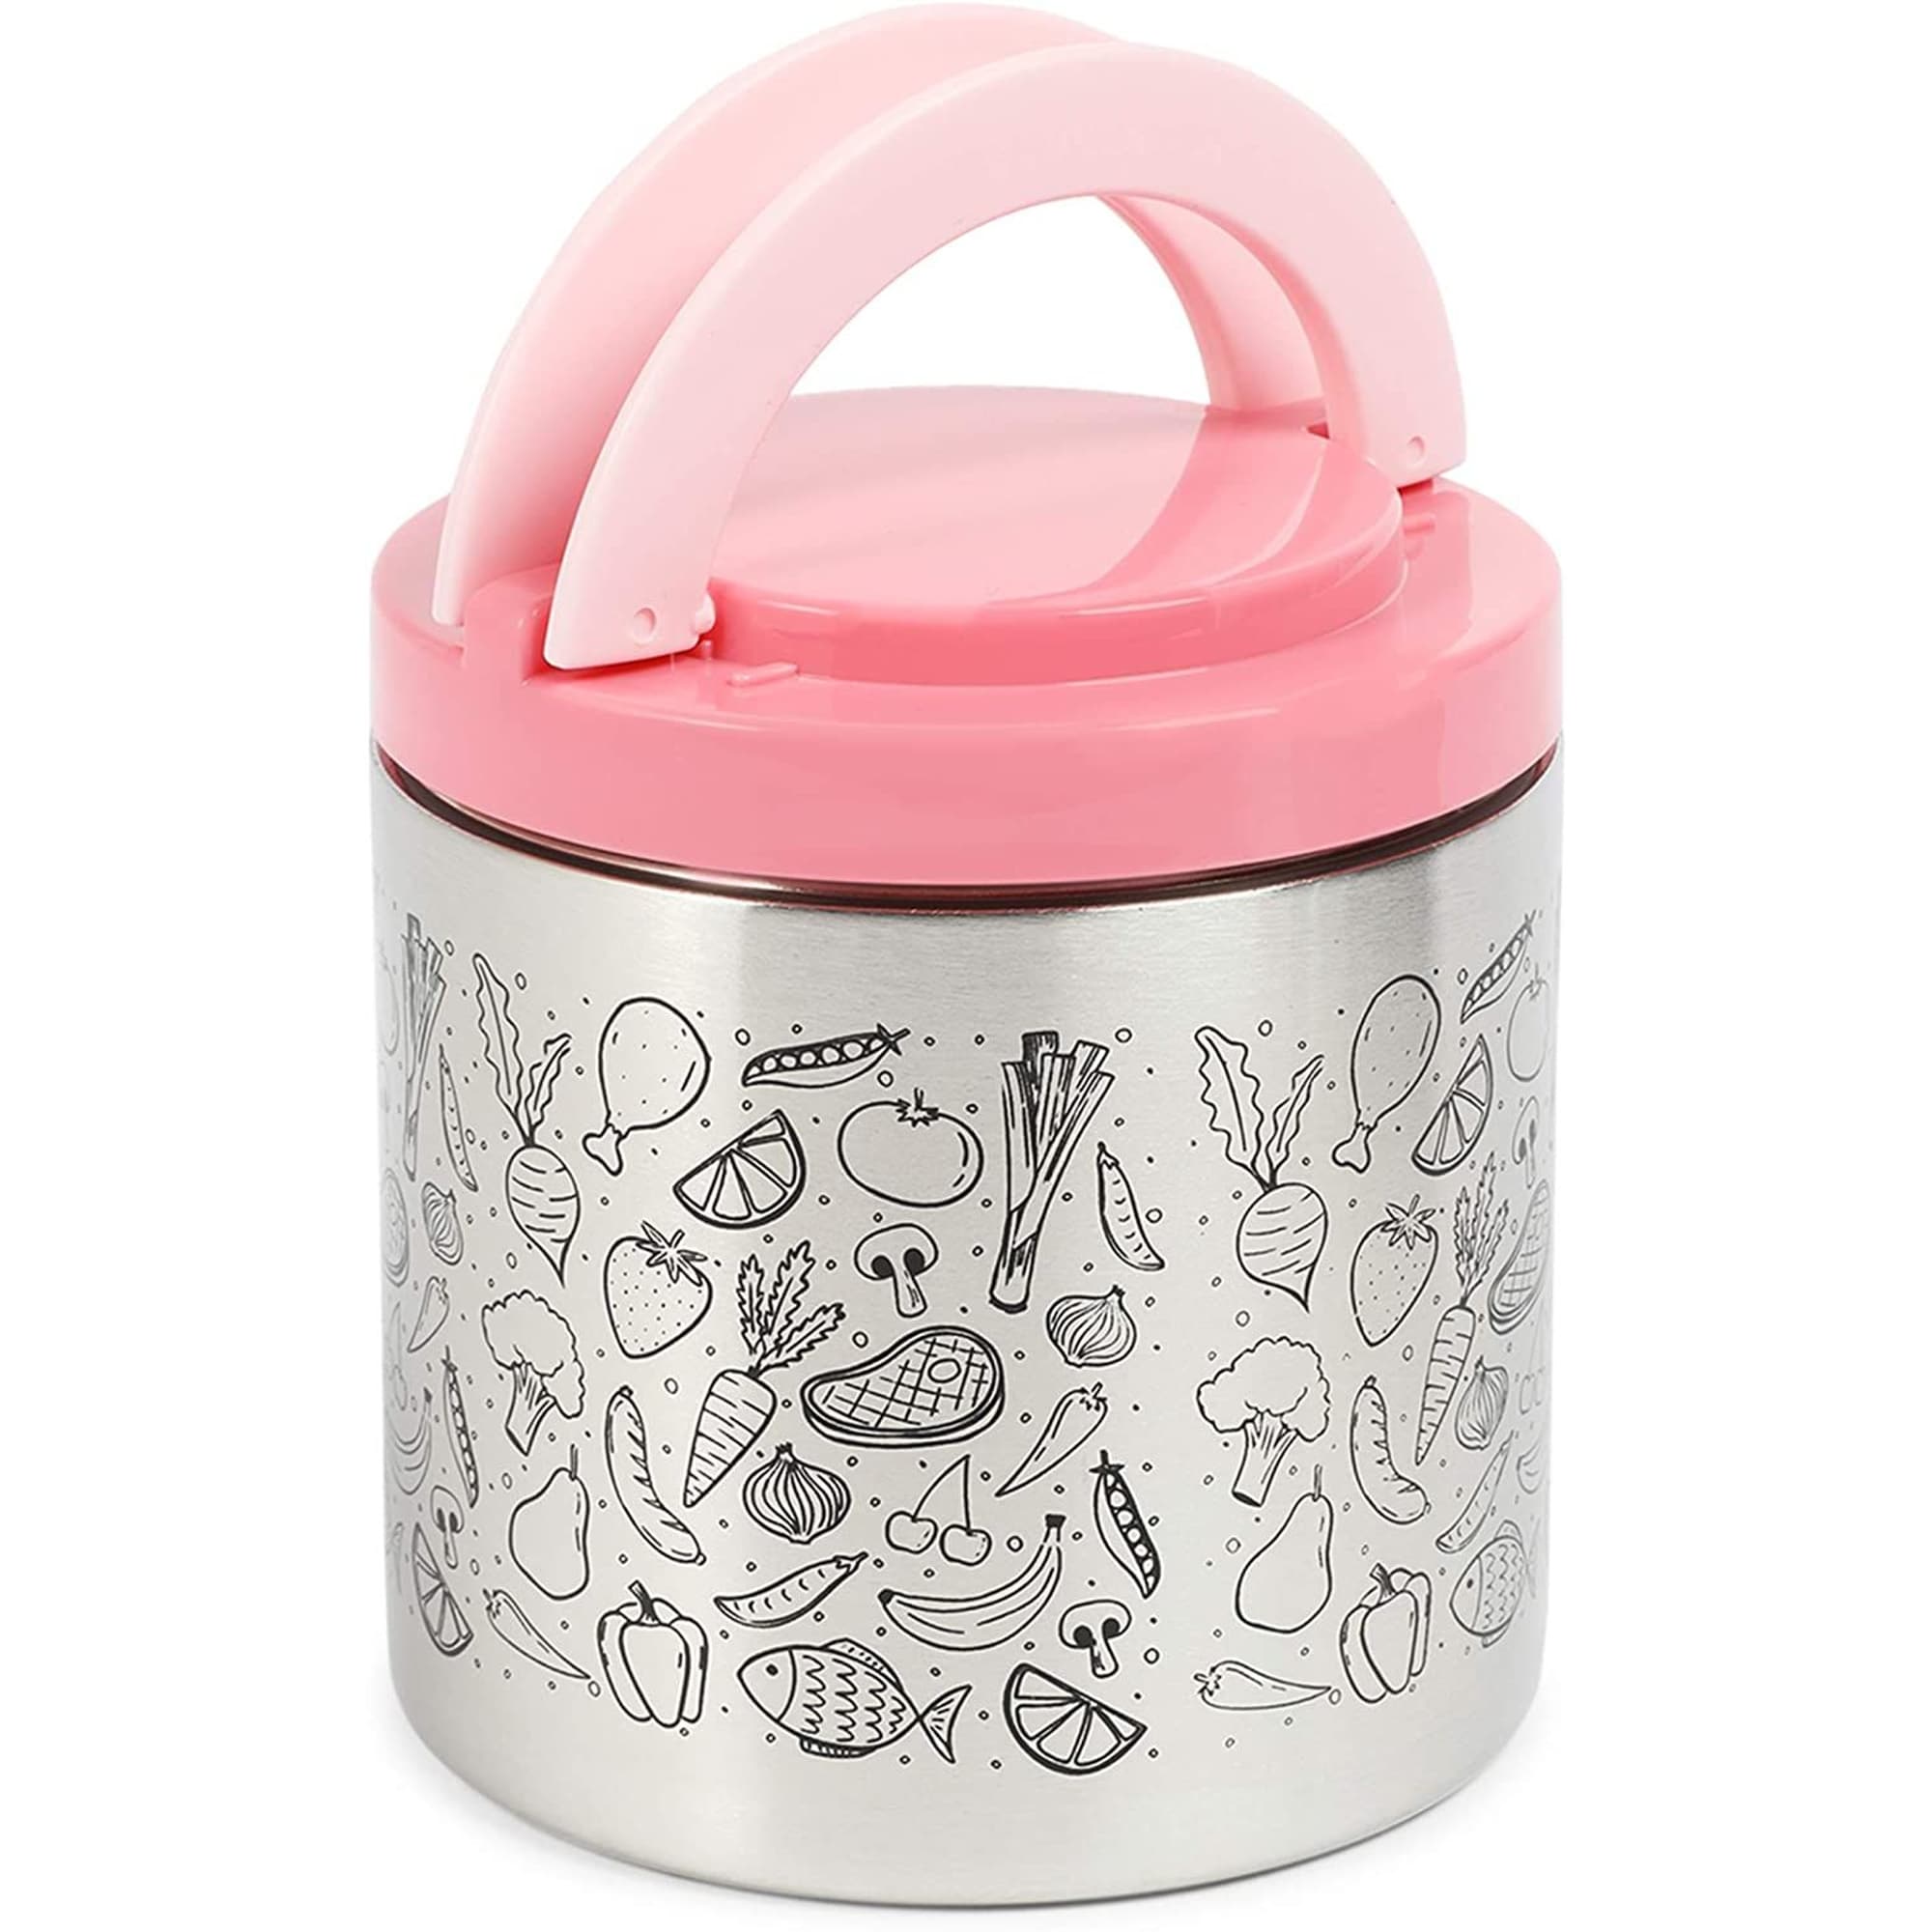 https://ak1.ostkcdn.com/images/products/is/images/direct/6bf6ab9aca46badacbd6a0ae76955a05a5250af8/Insulated-Lunch-Container-with-Handles-%2822-oz%2C-Pink%29.jpg